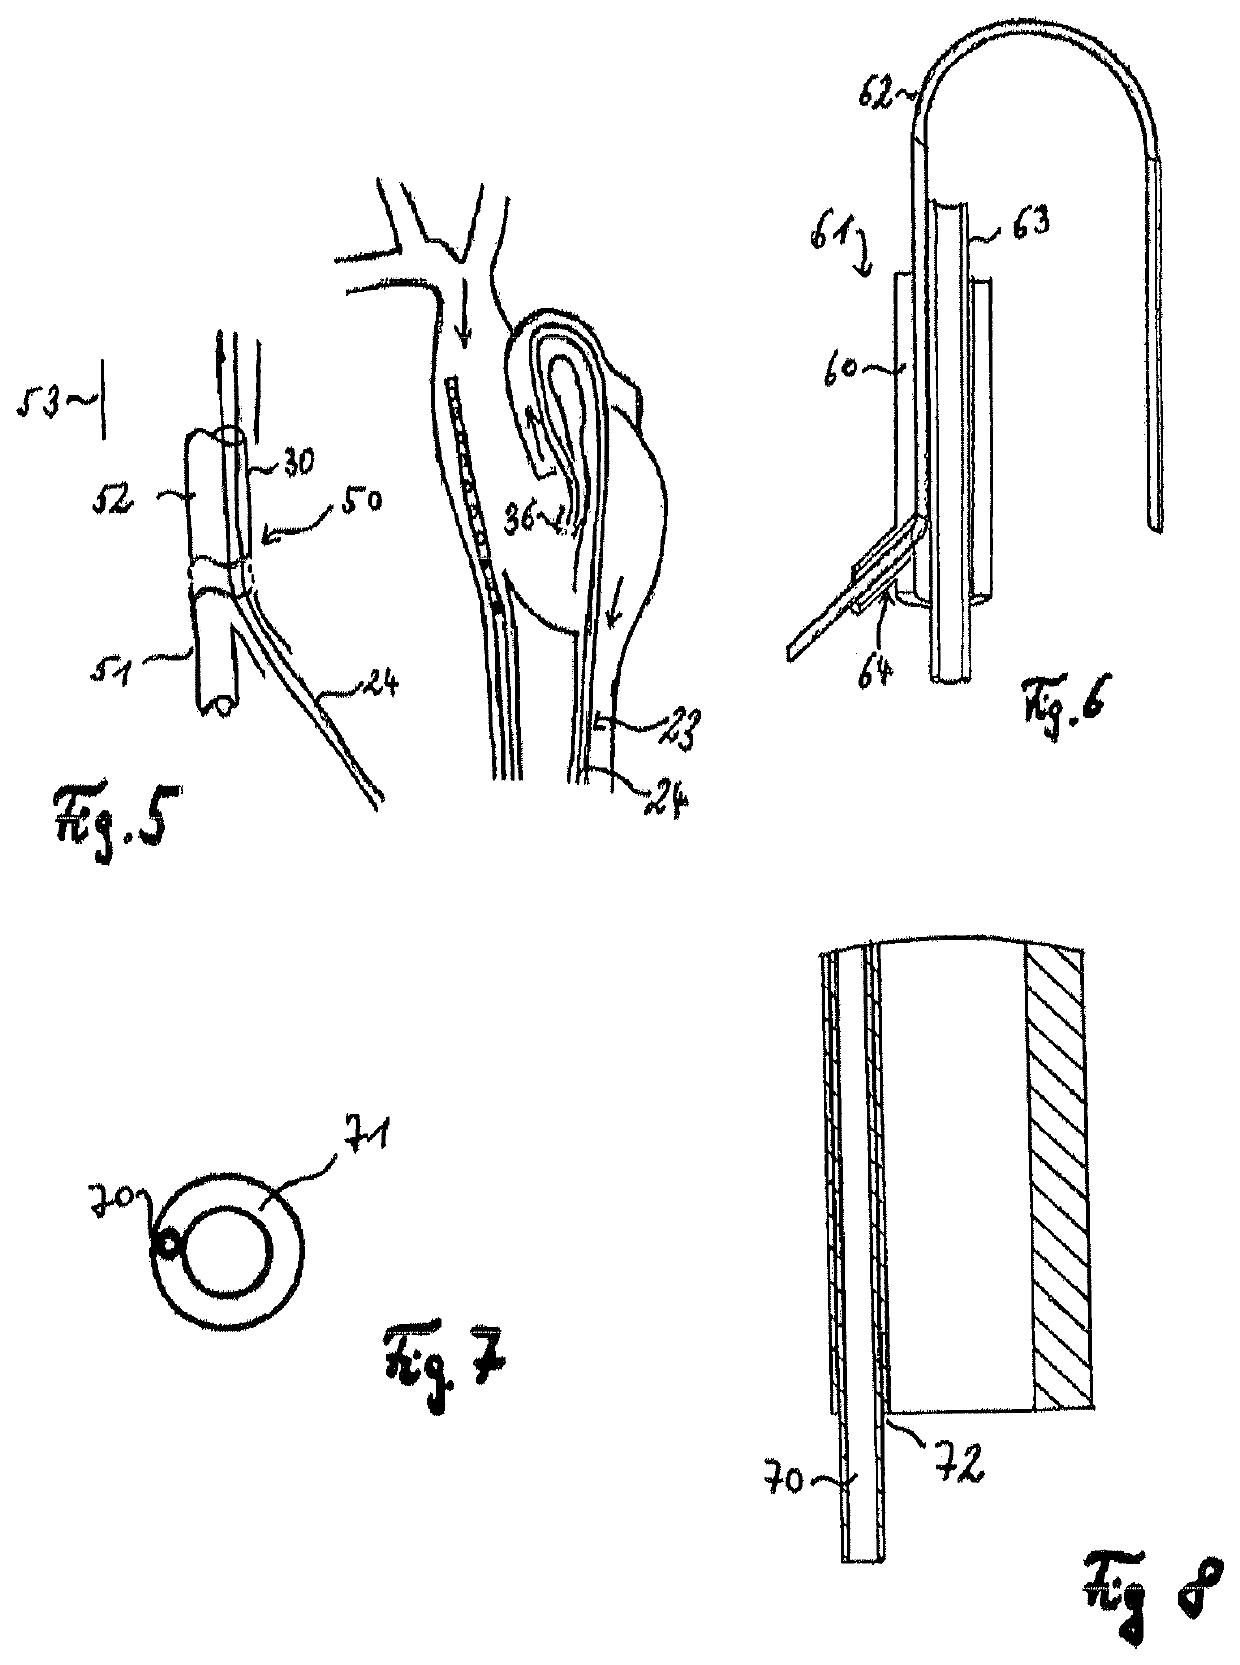 Assembly comprising a suction line, a pressure line and a pump